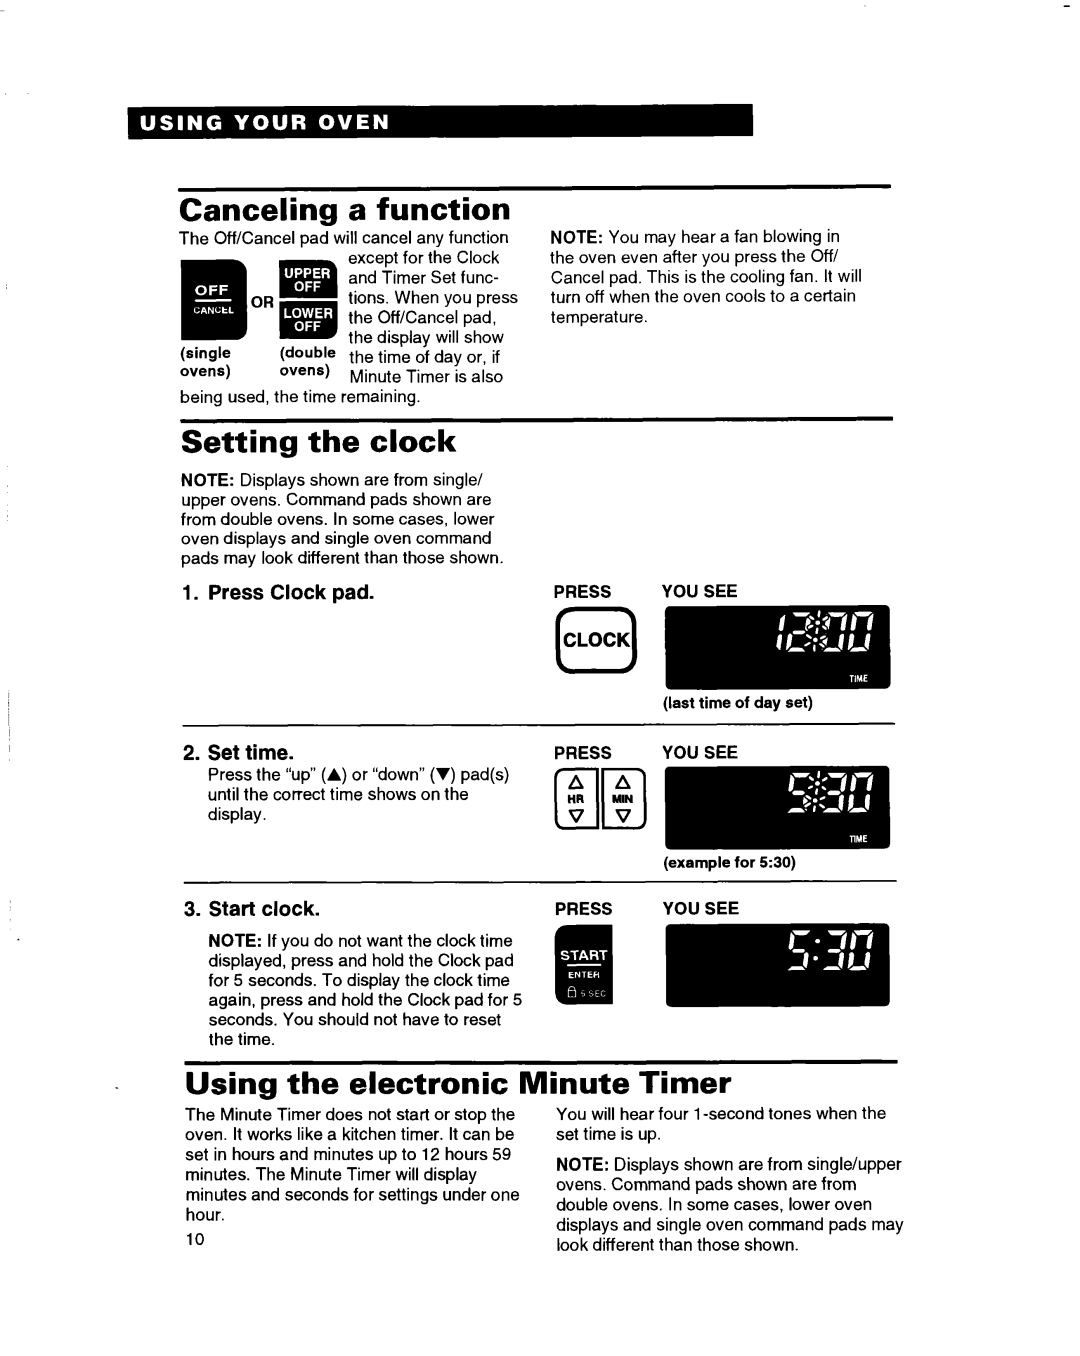 Whirlpool RBS245PD, RBS305PD, RBS270PD Canceling a function, Setting the clock, Using the electronic Minute Timer, liin 